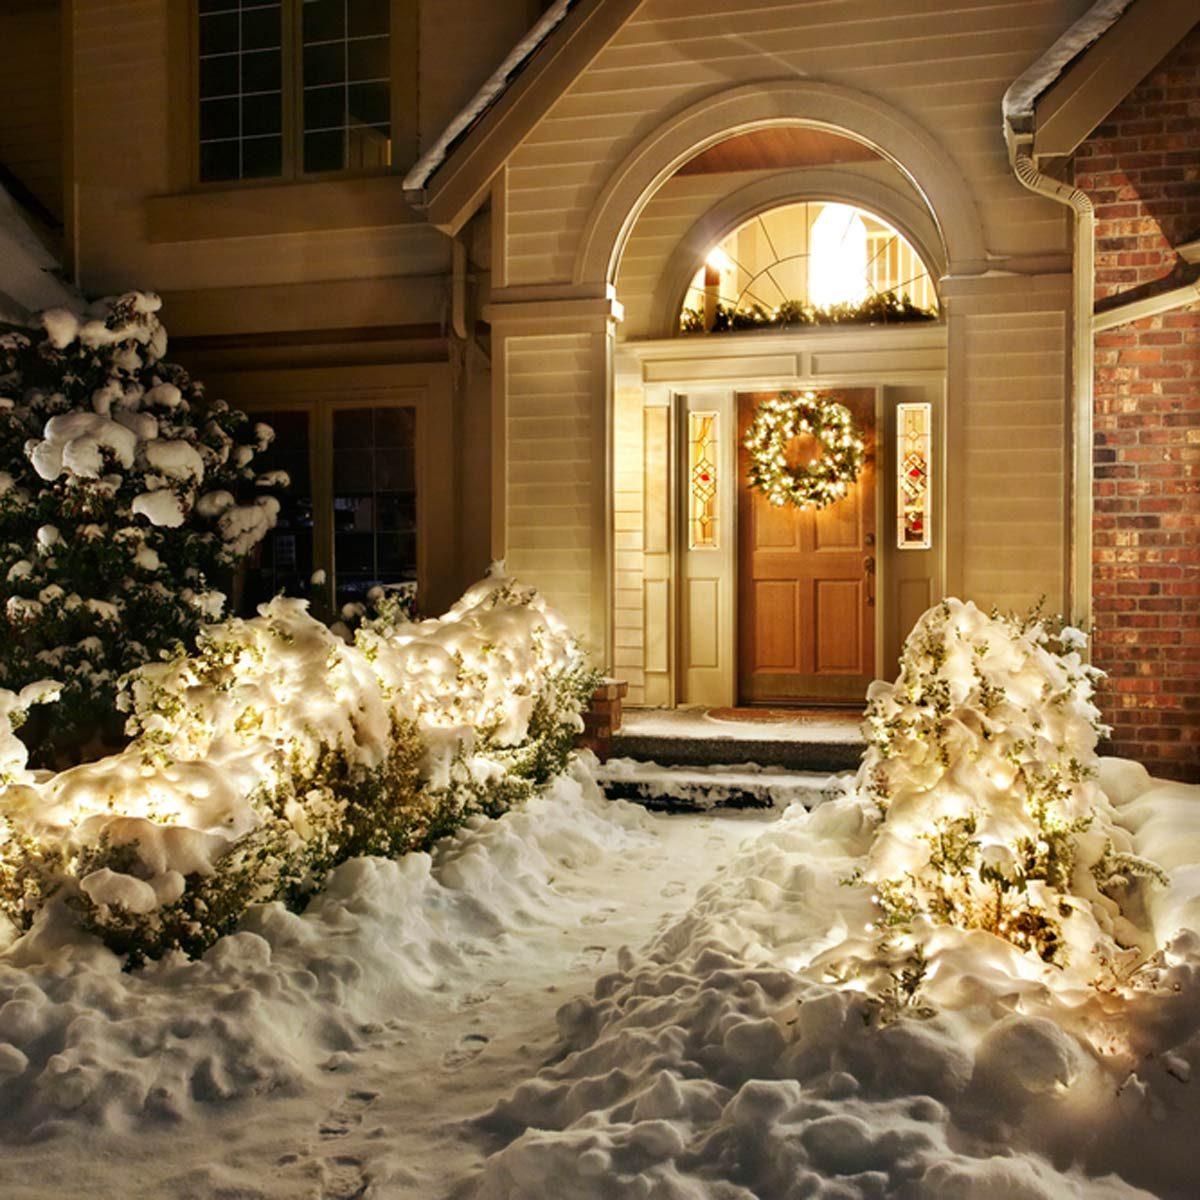 Holiday Light Company in Maple Grove MN<br><br><br>